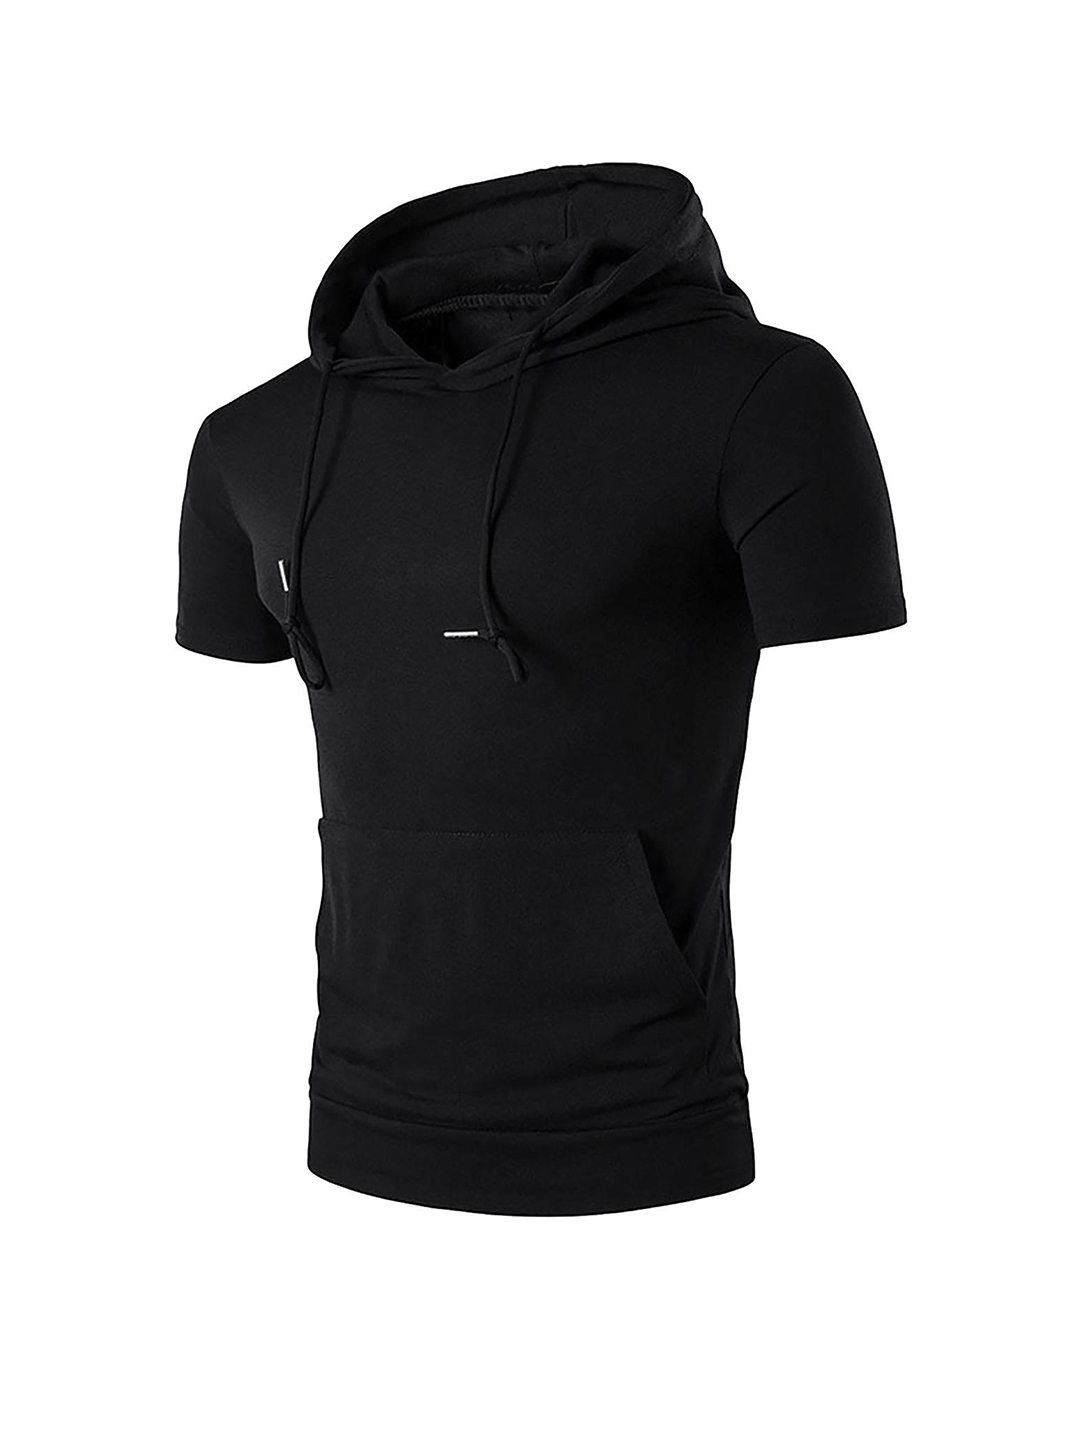 Men's Ronald Solid Color Hooded Casual T-shirt-poisonstreetwear.com